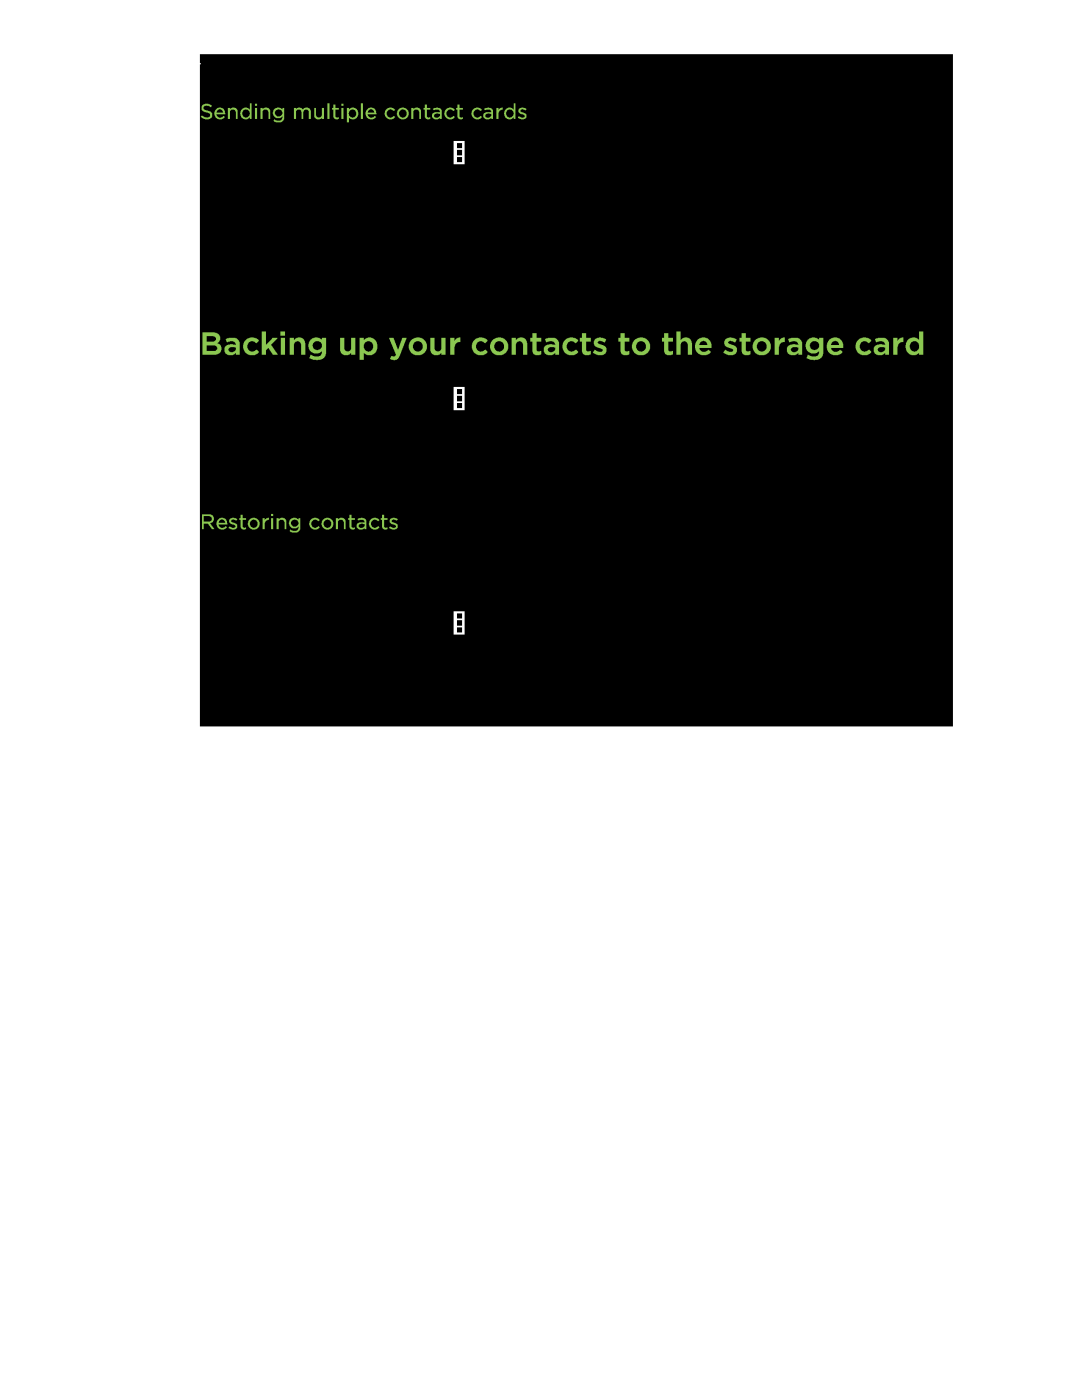 HTC C3HTCONEV4GBUNLOCKEDBLACK manual Backing up your contacts to the storage card, Sending multiple contact cards 